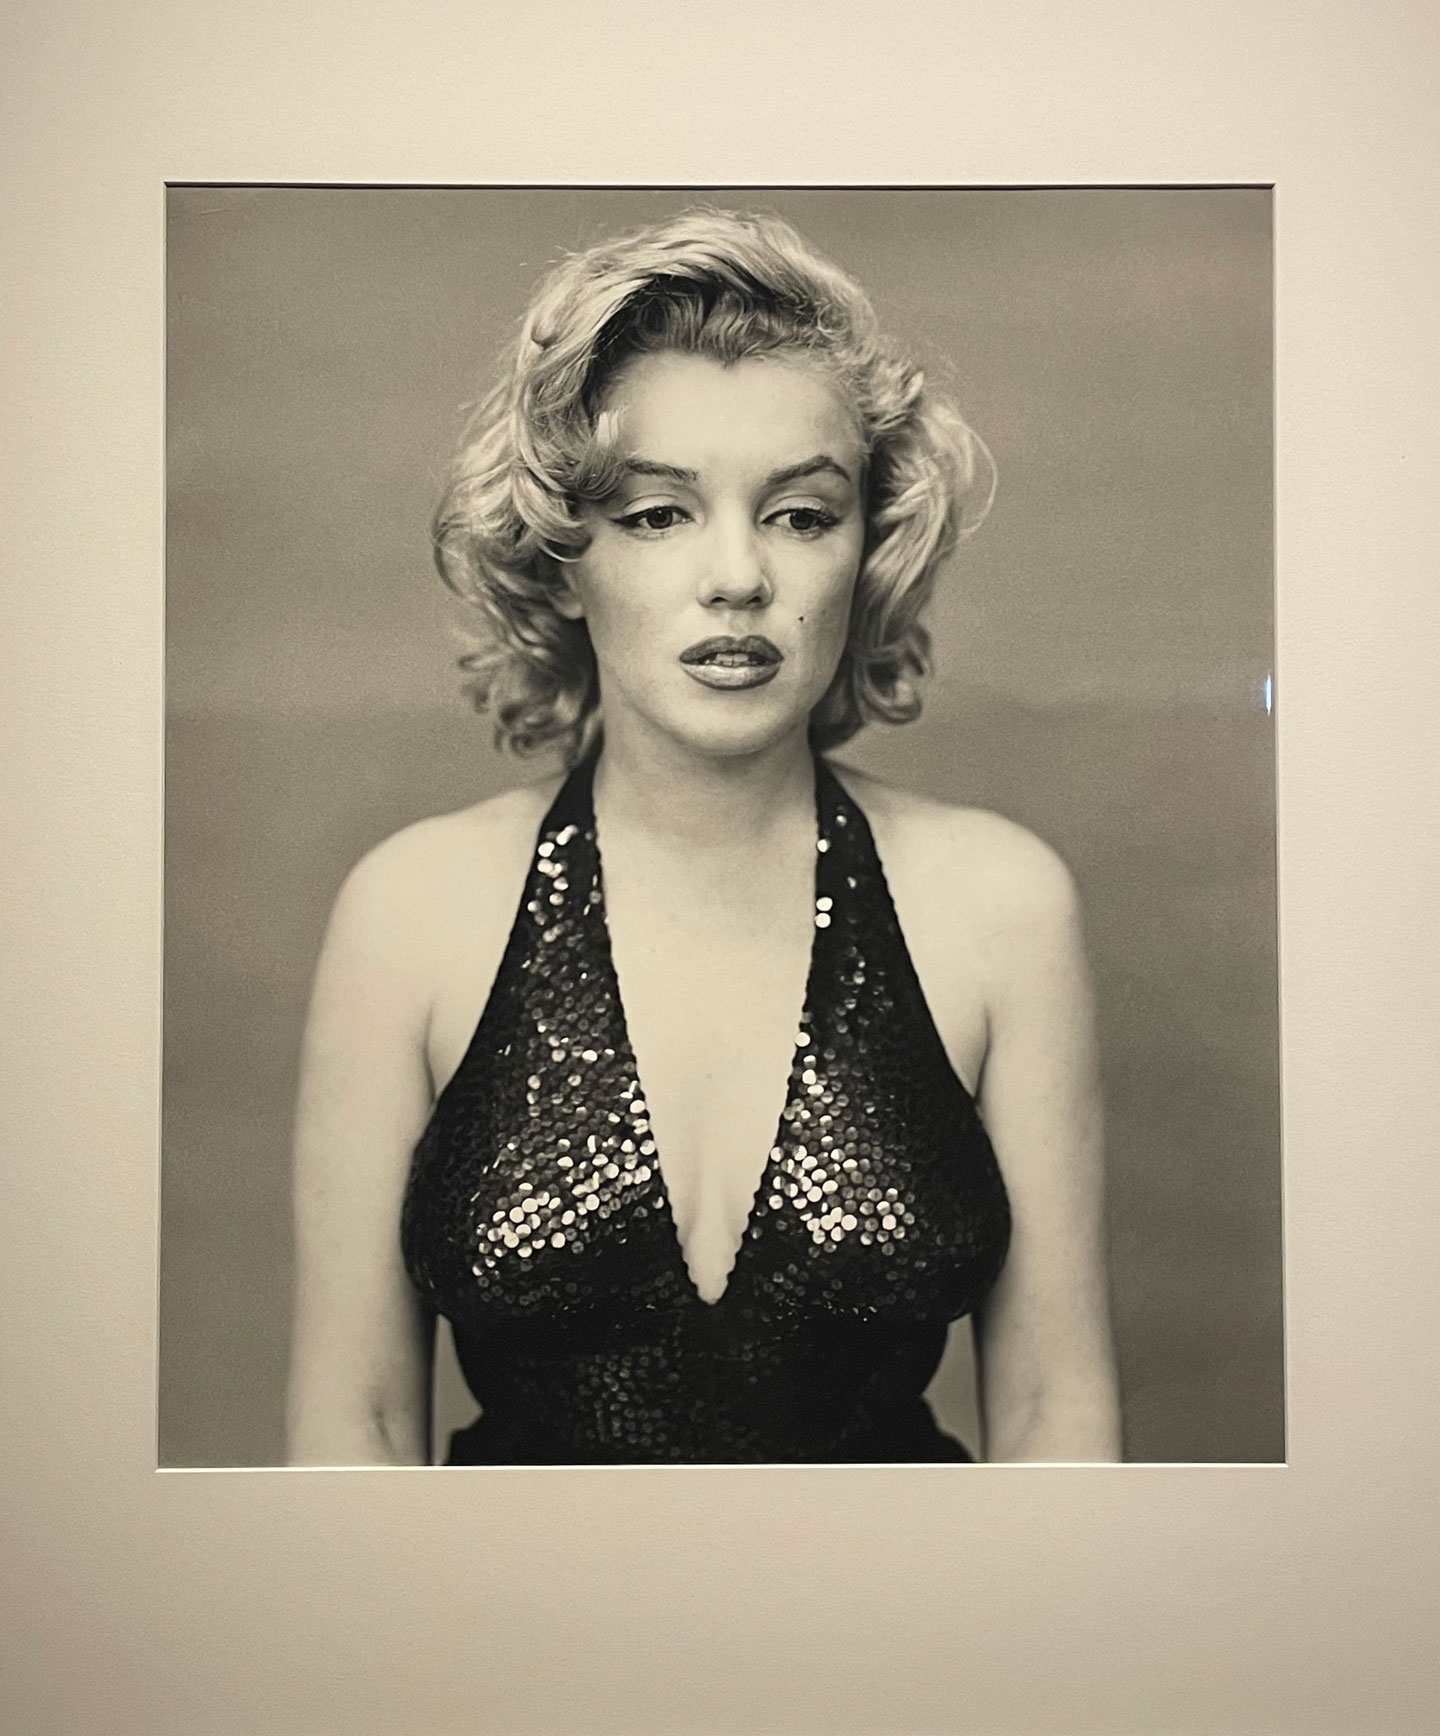 Actress and pop culture icon Marilyn Monroe was also among Richard Avedon’s sitters. "He managed to capture one of the most photographed stars with her public façade down, producing an image that provides a rare glimpse of her inner life," MoMA stated